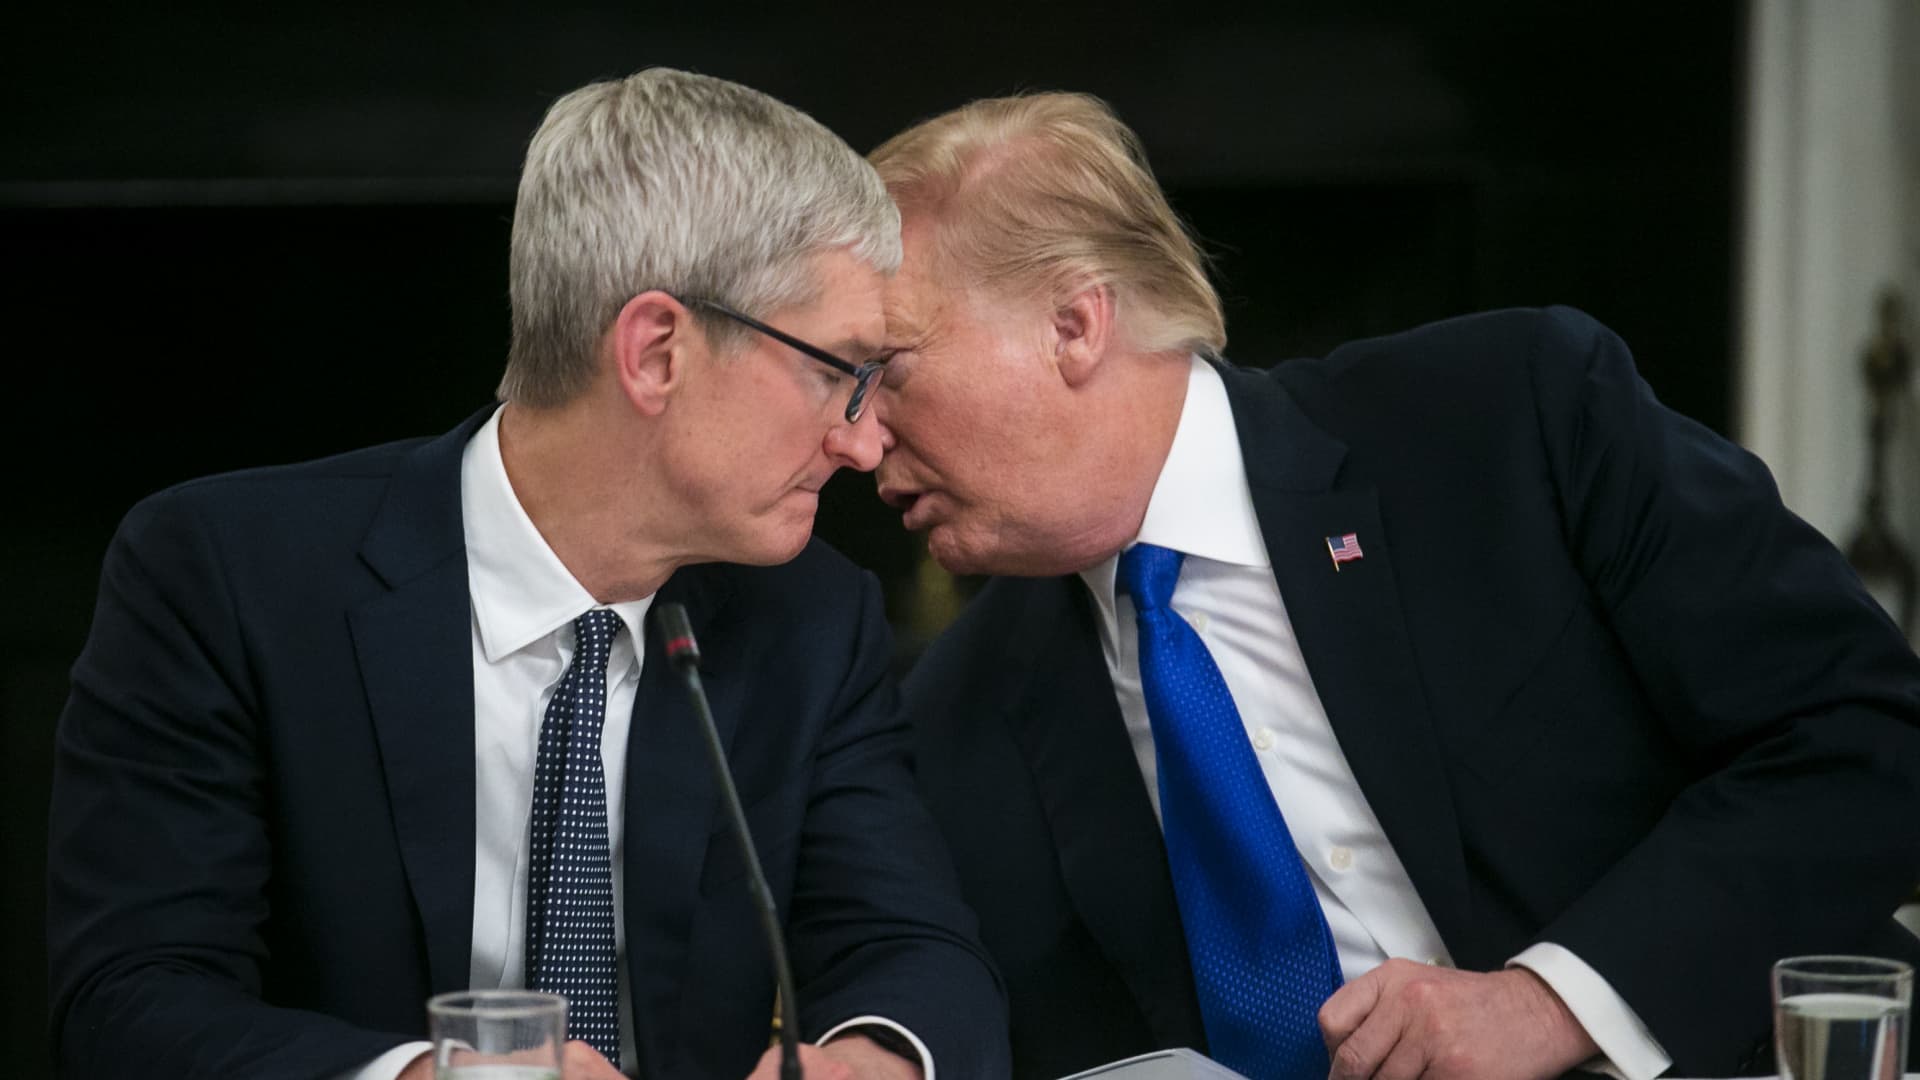 Trump says Apple is spending 'vast sums of money in the U.S.' and he's having dinner with the CEO